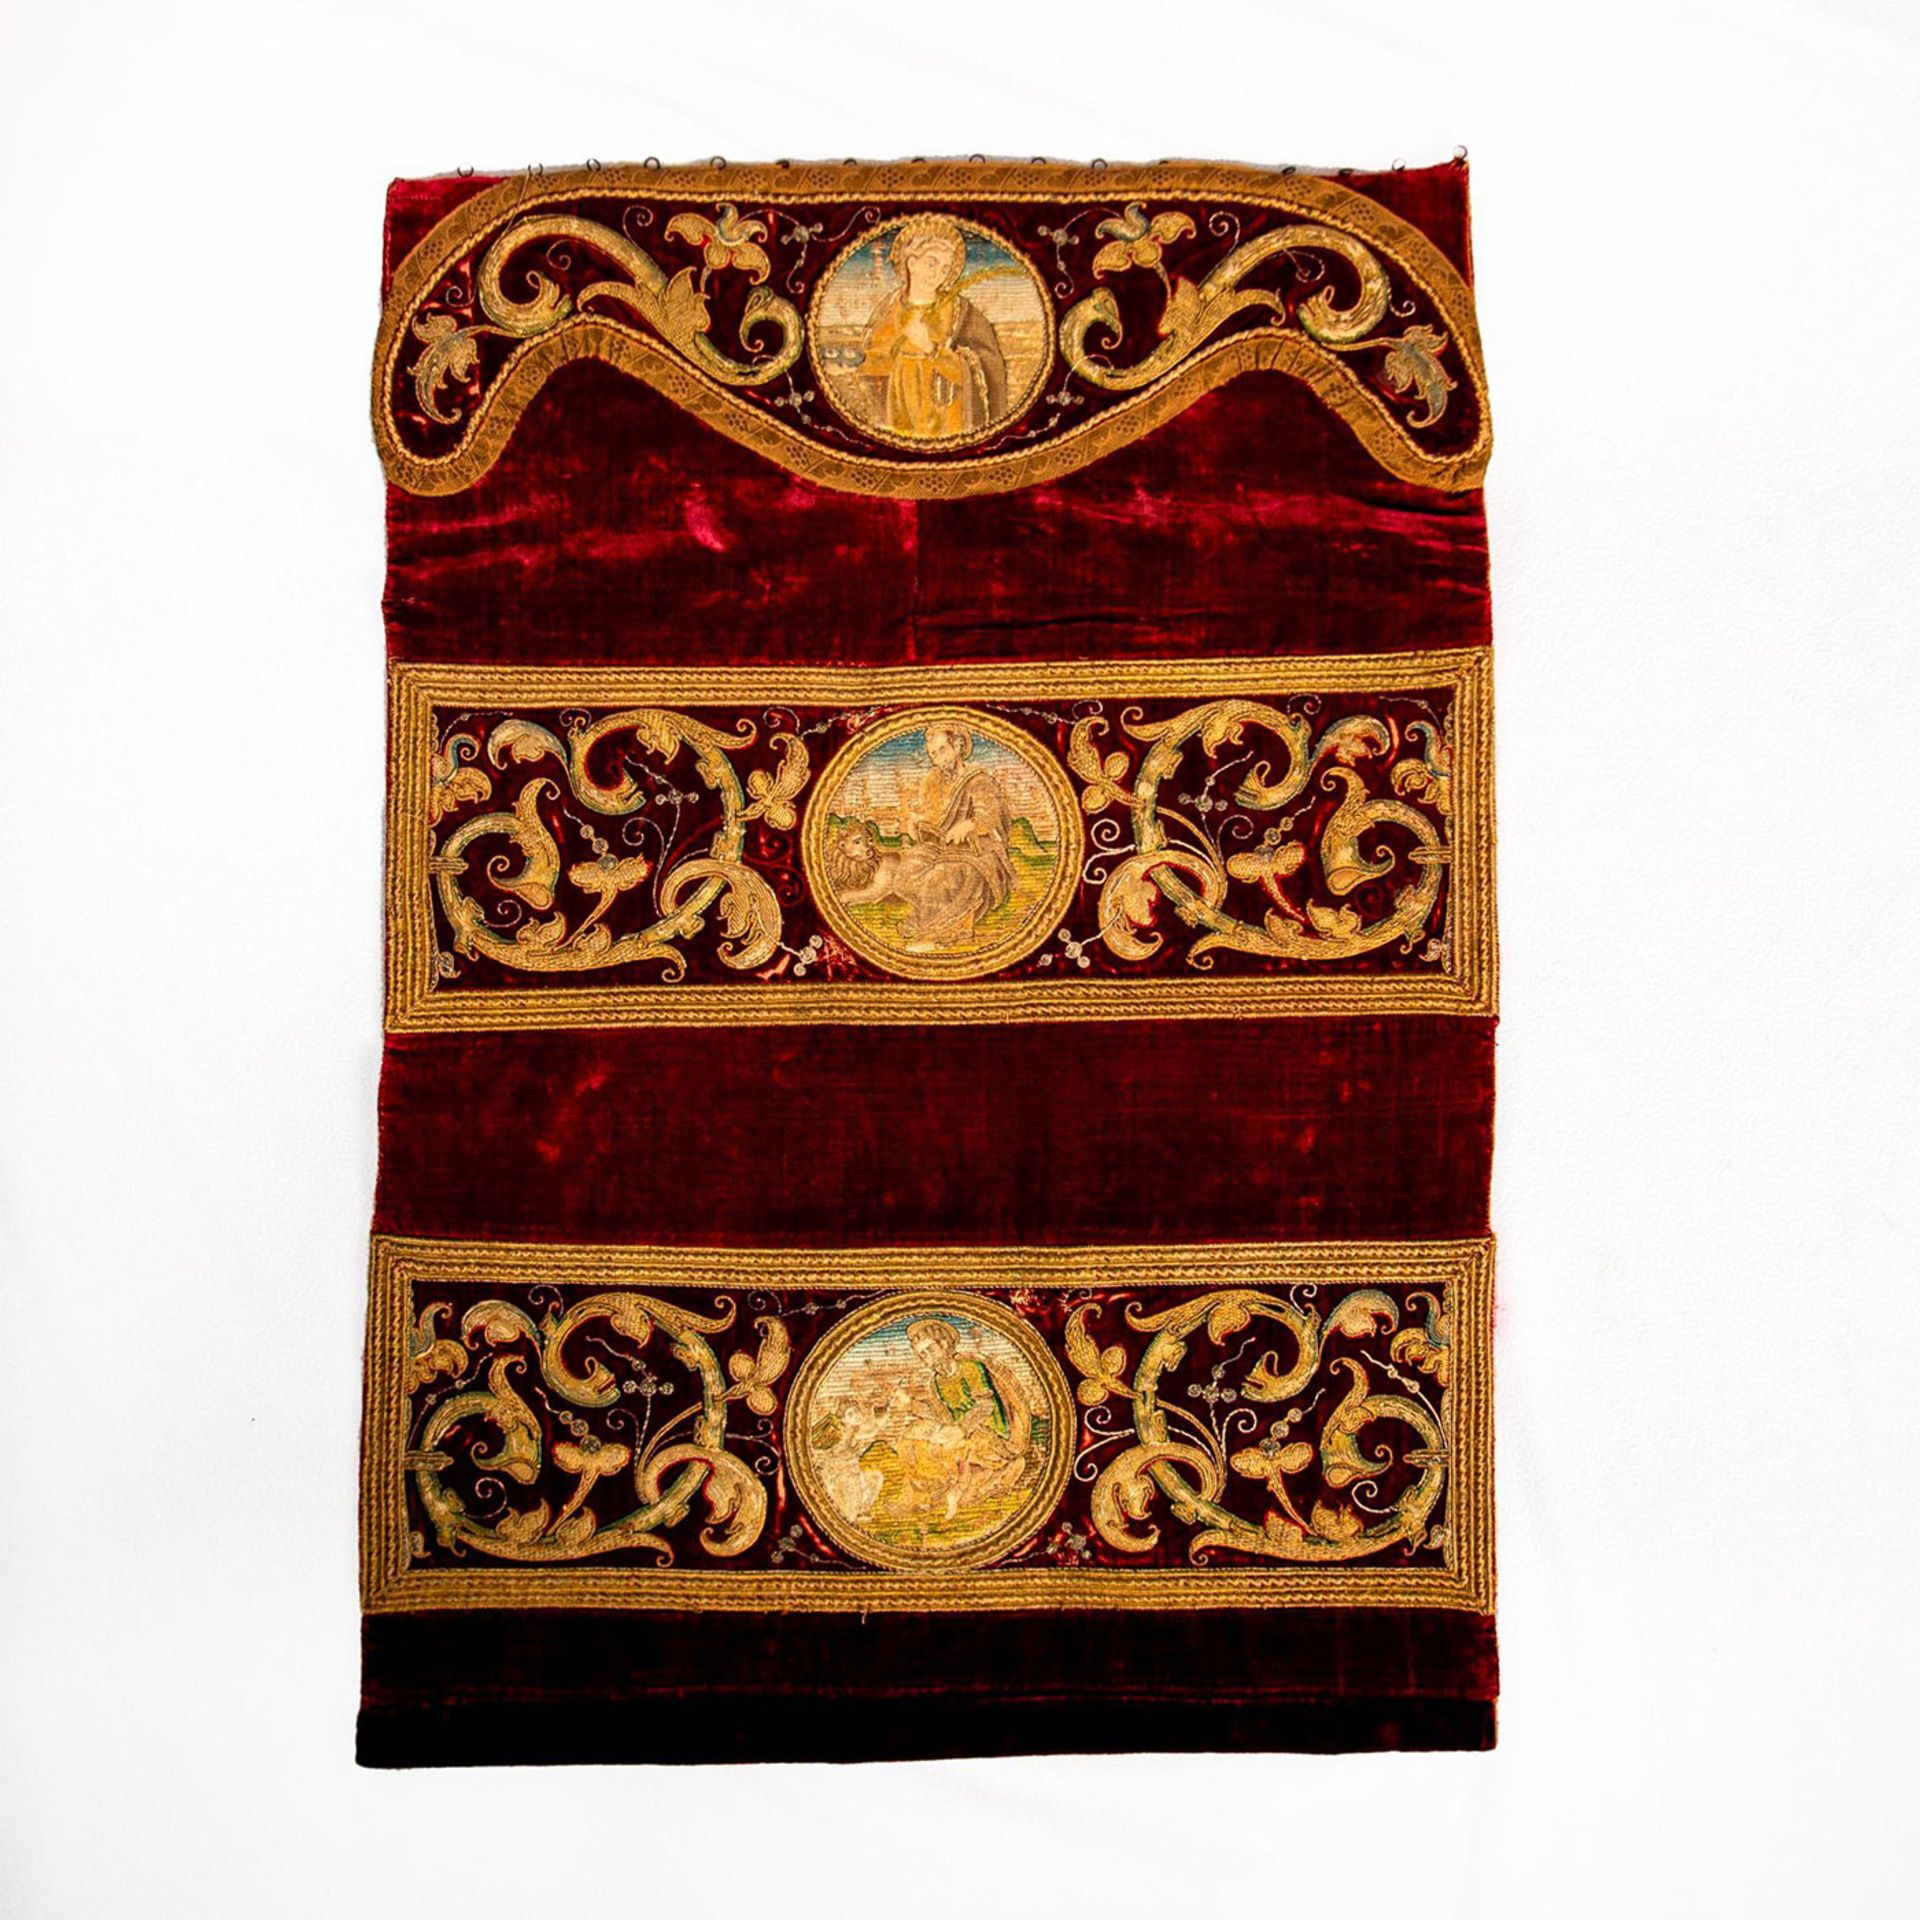 16th Century European Embroidered Wall Hanging - Image 2 of 6